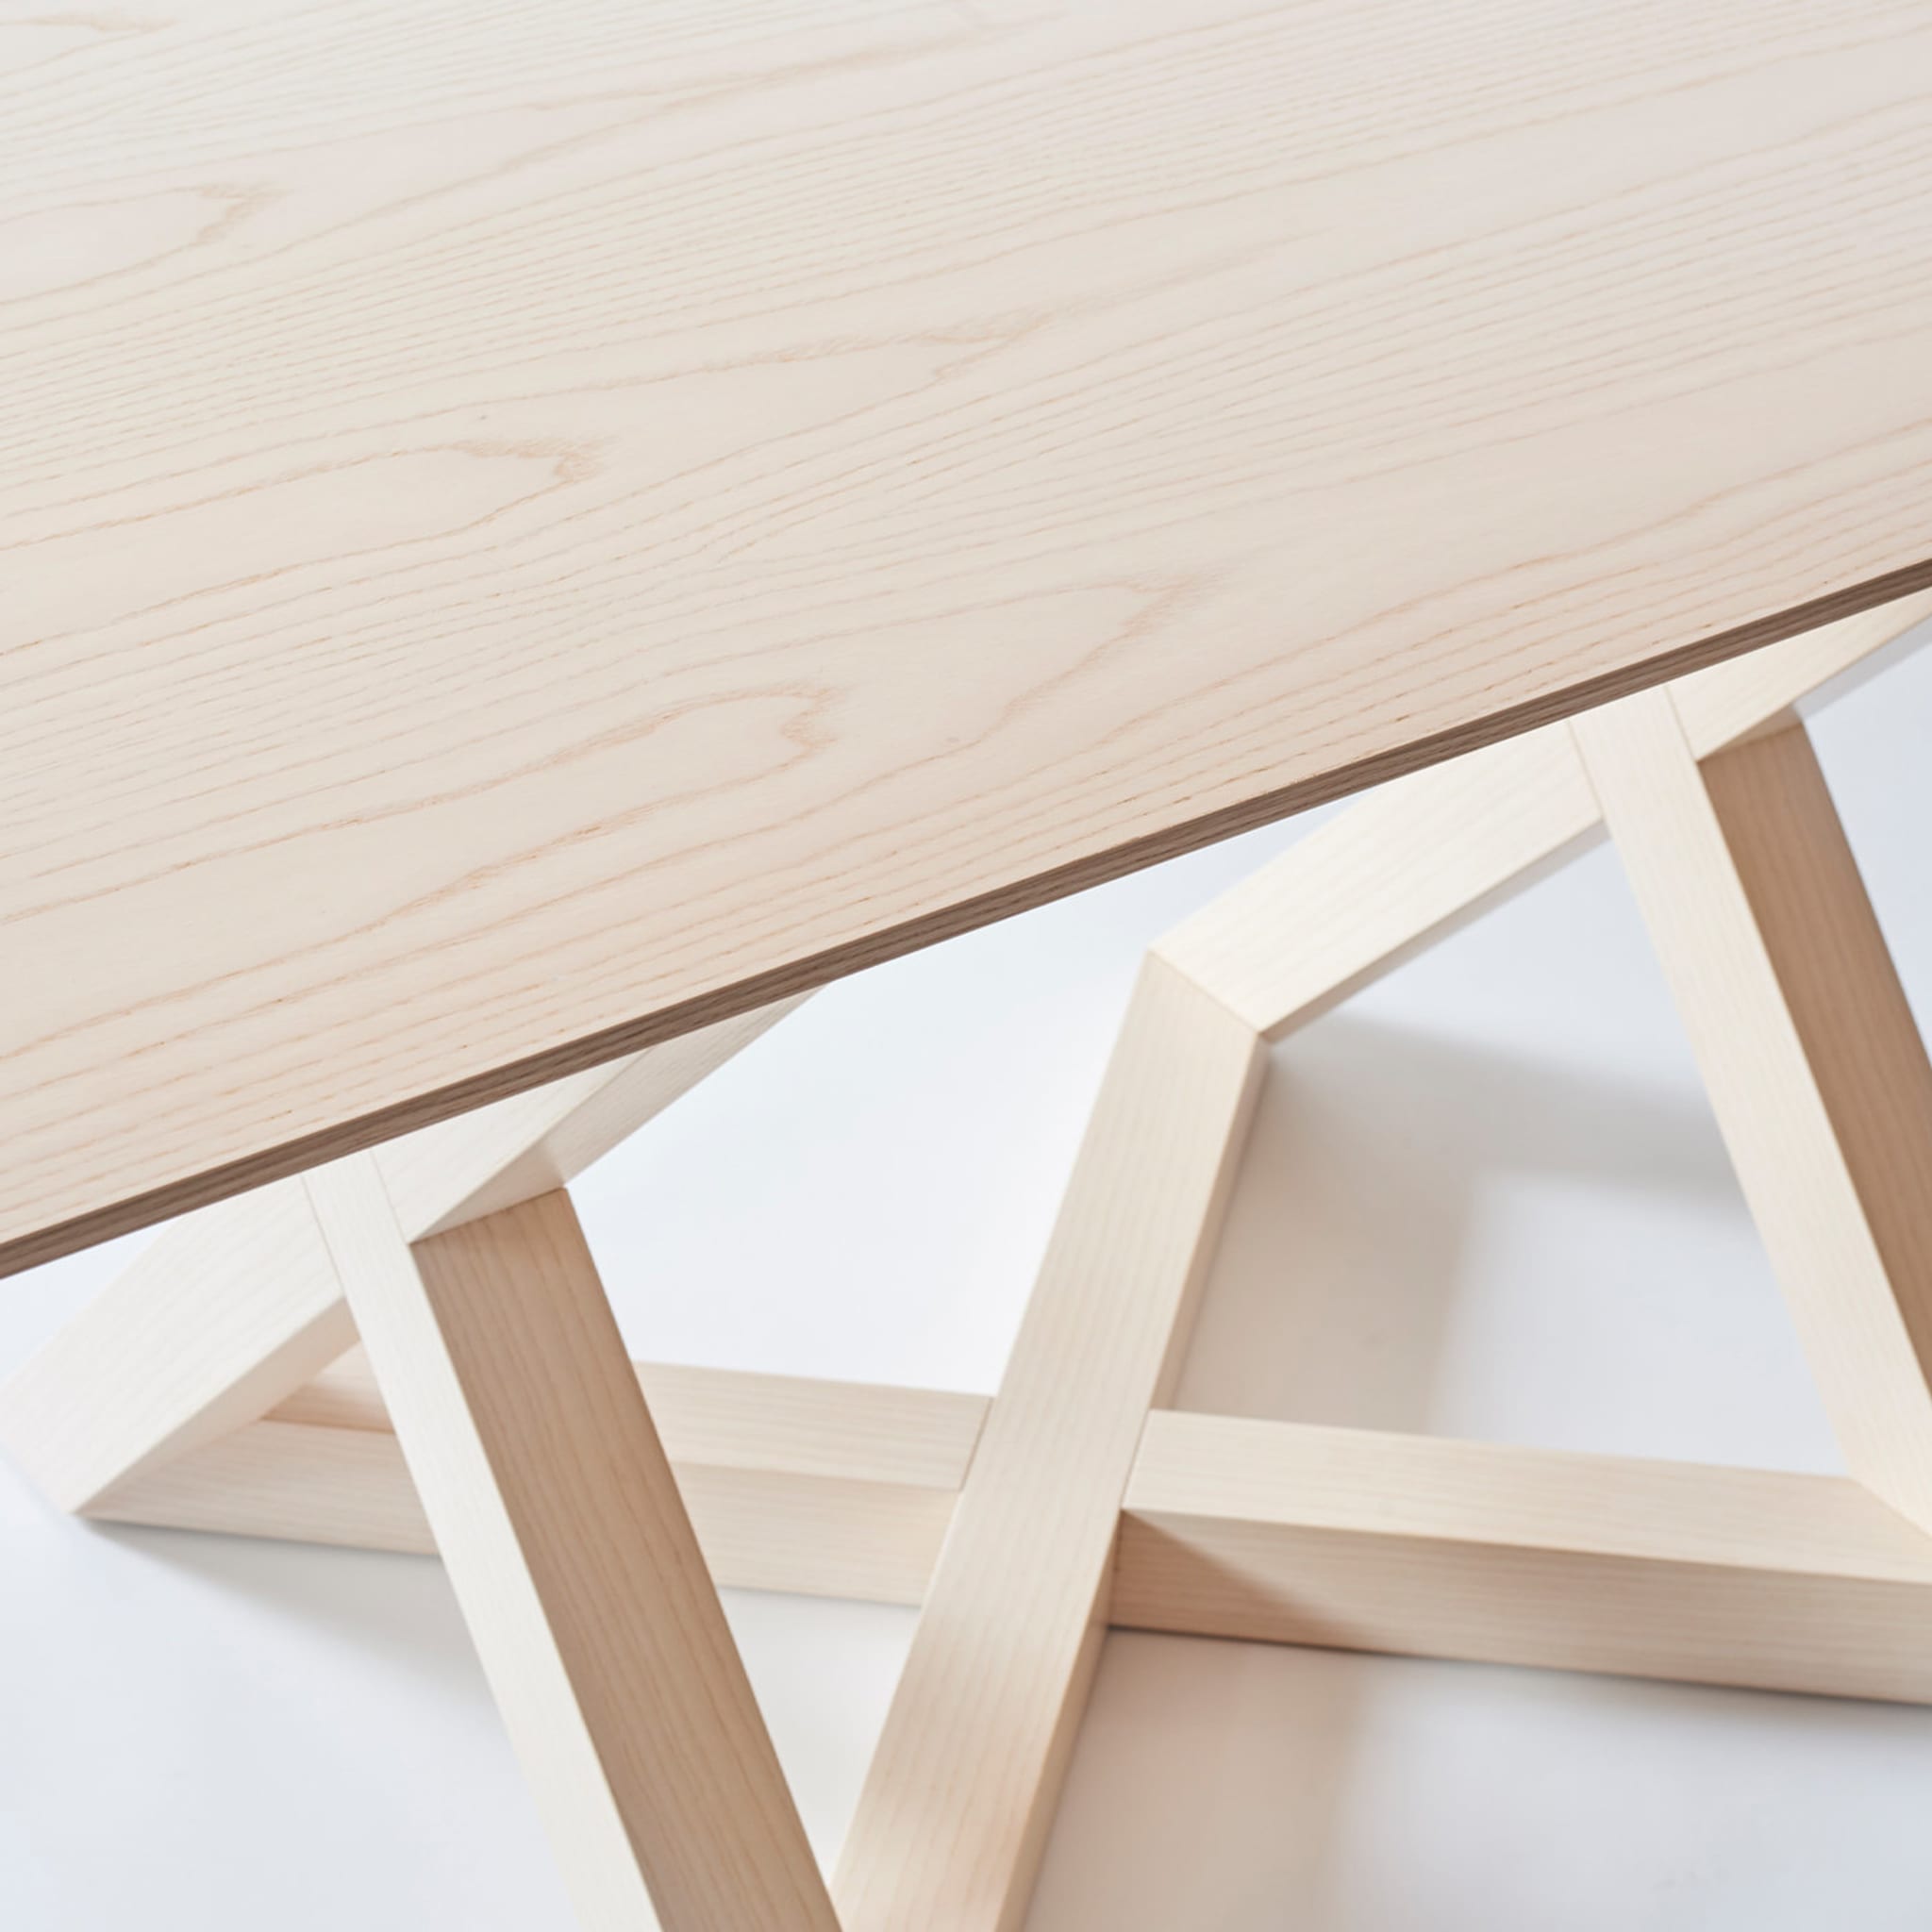 RK Wooden Dining Table by Antonio Saporito - Alternative view 1